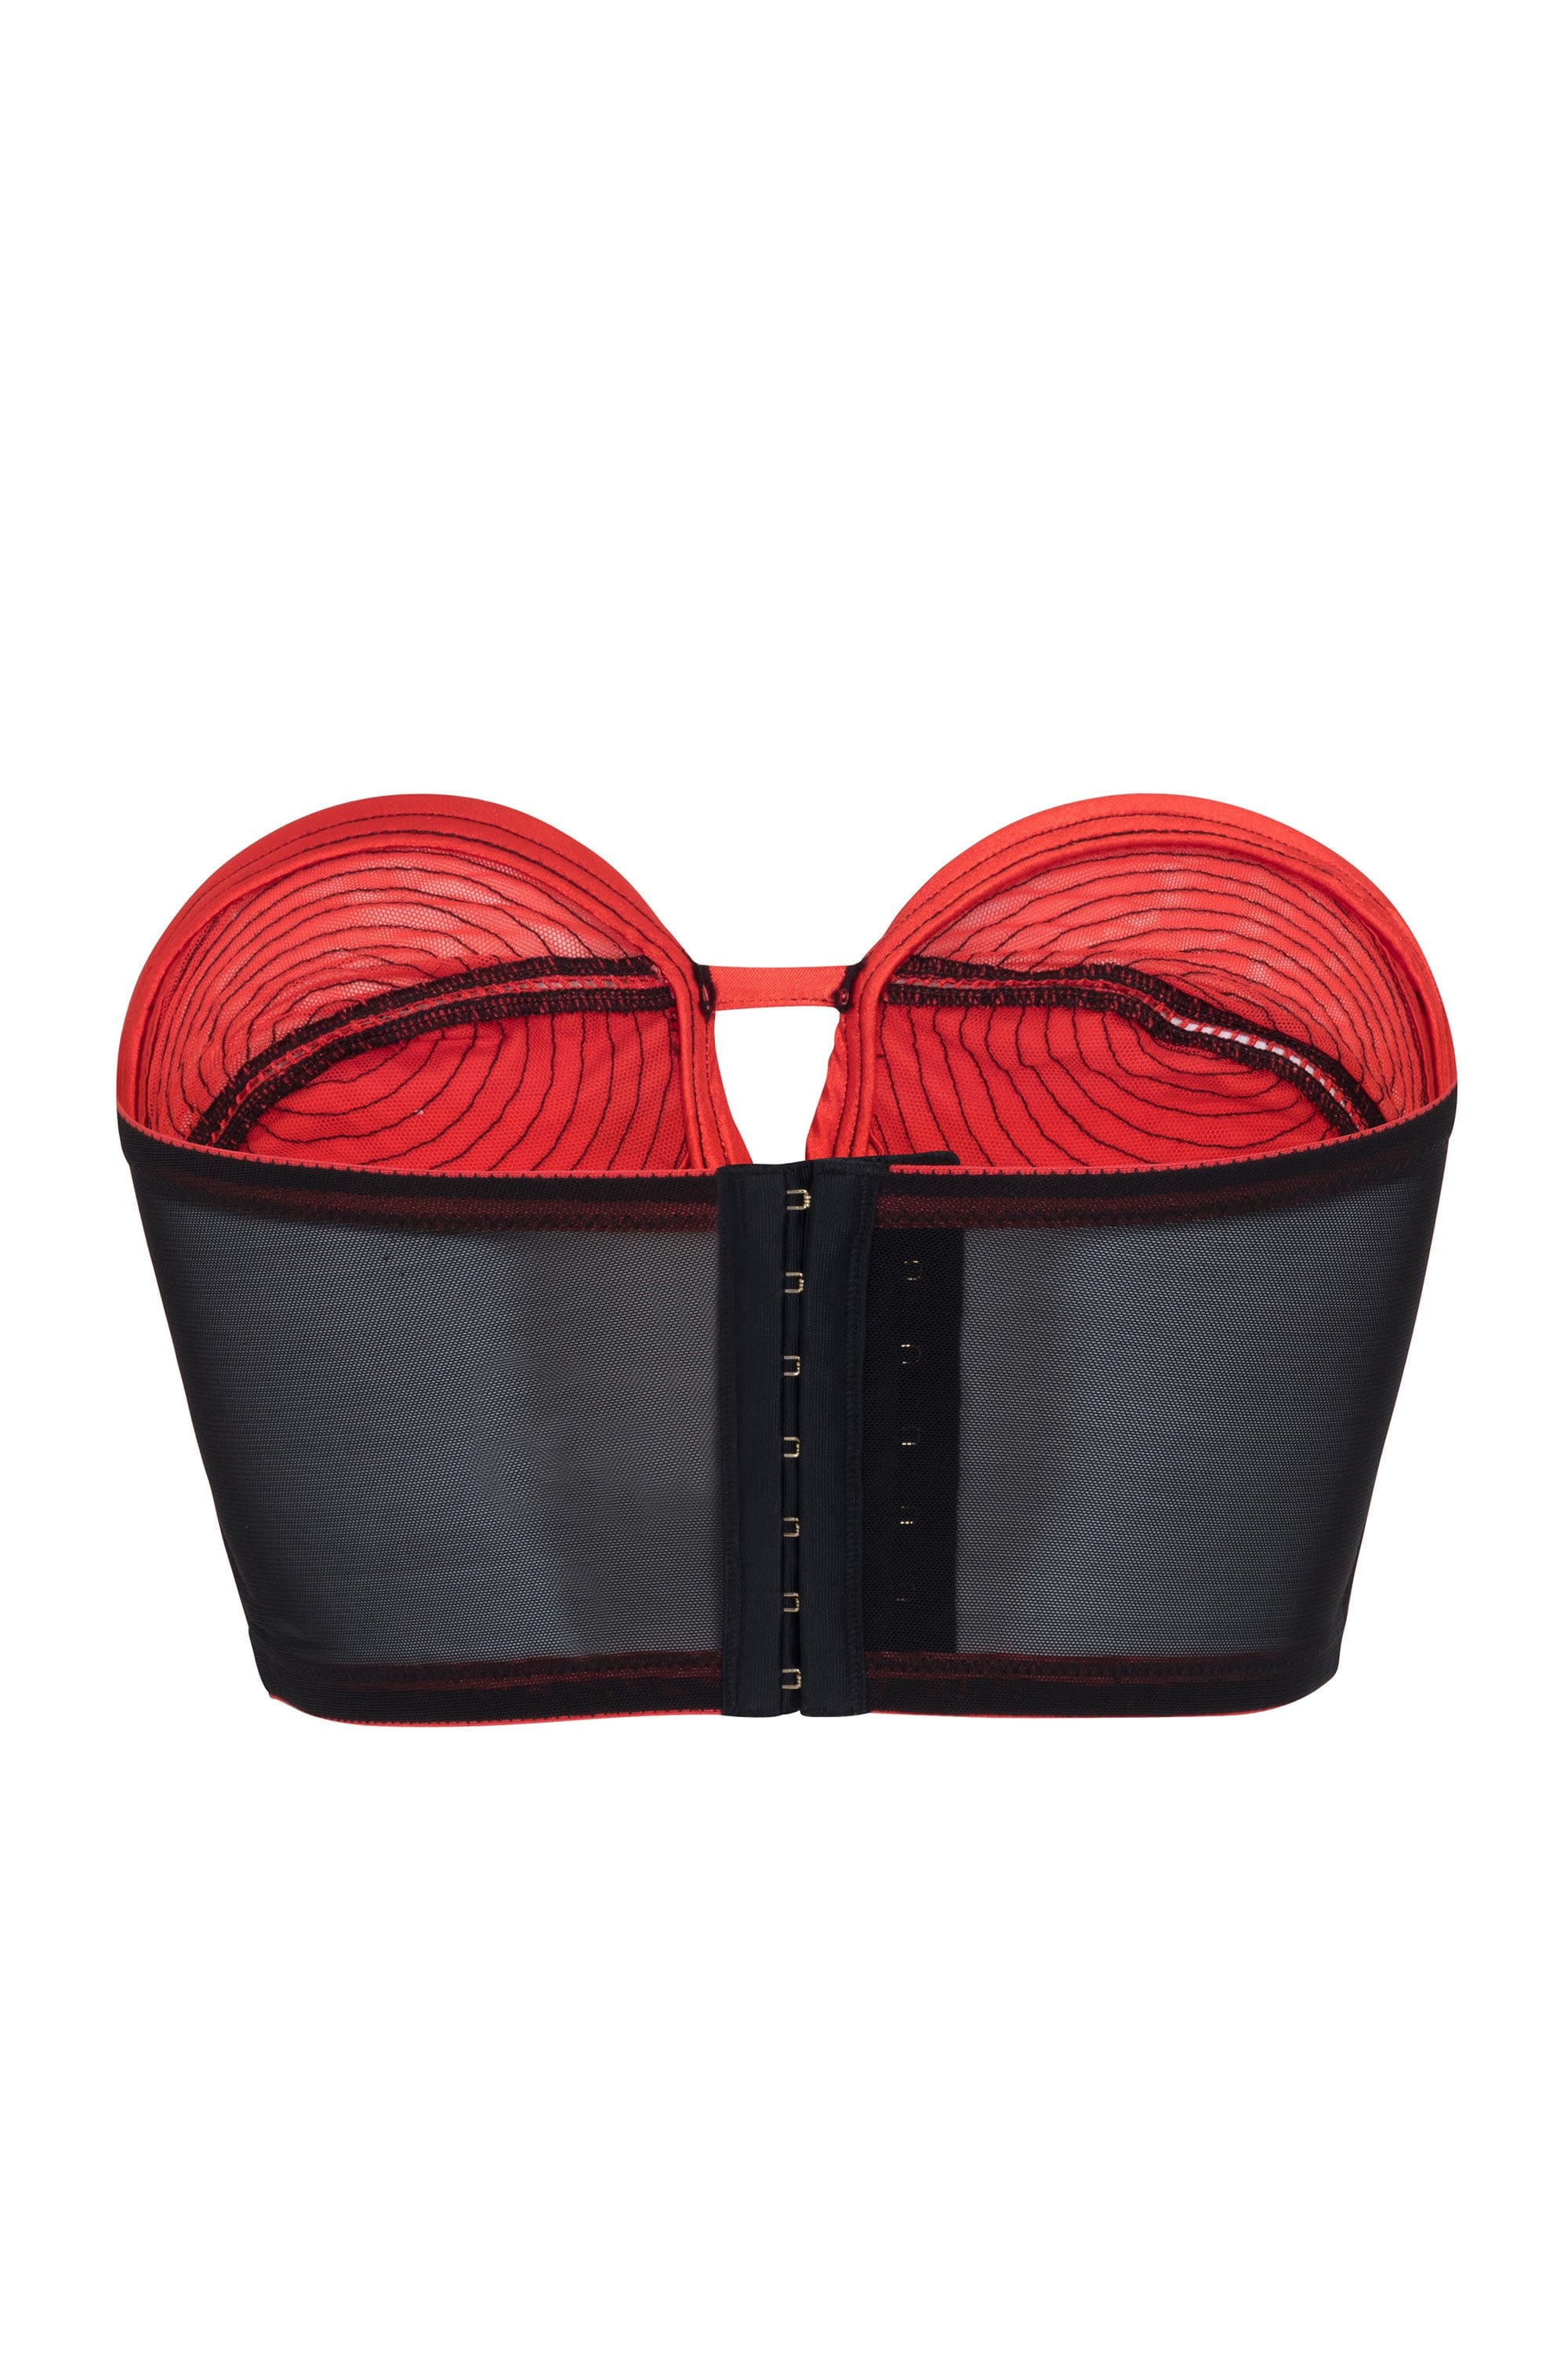 Bettie Page Longline Red/Black Overwire Bra A - DD/E - Playful Promises USA